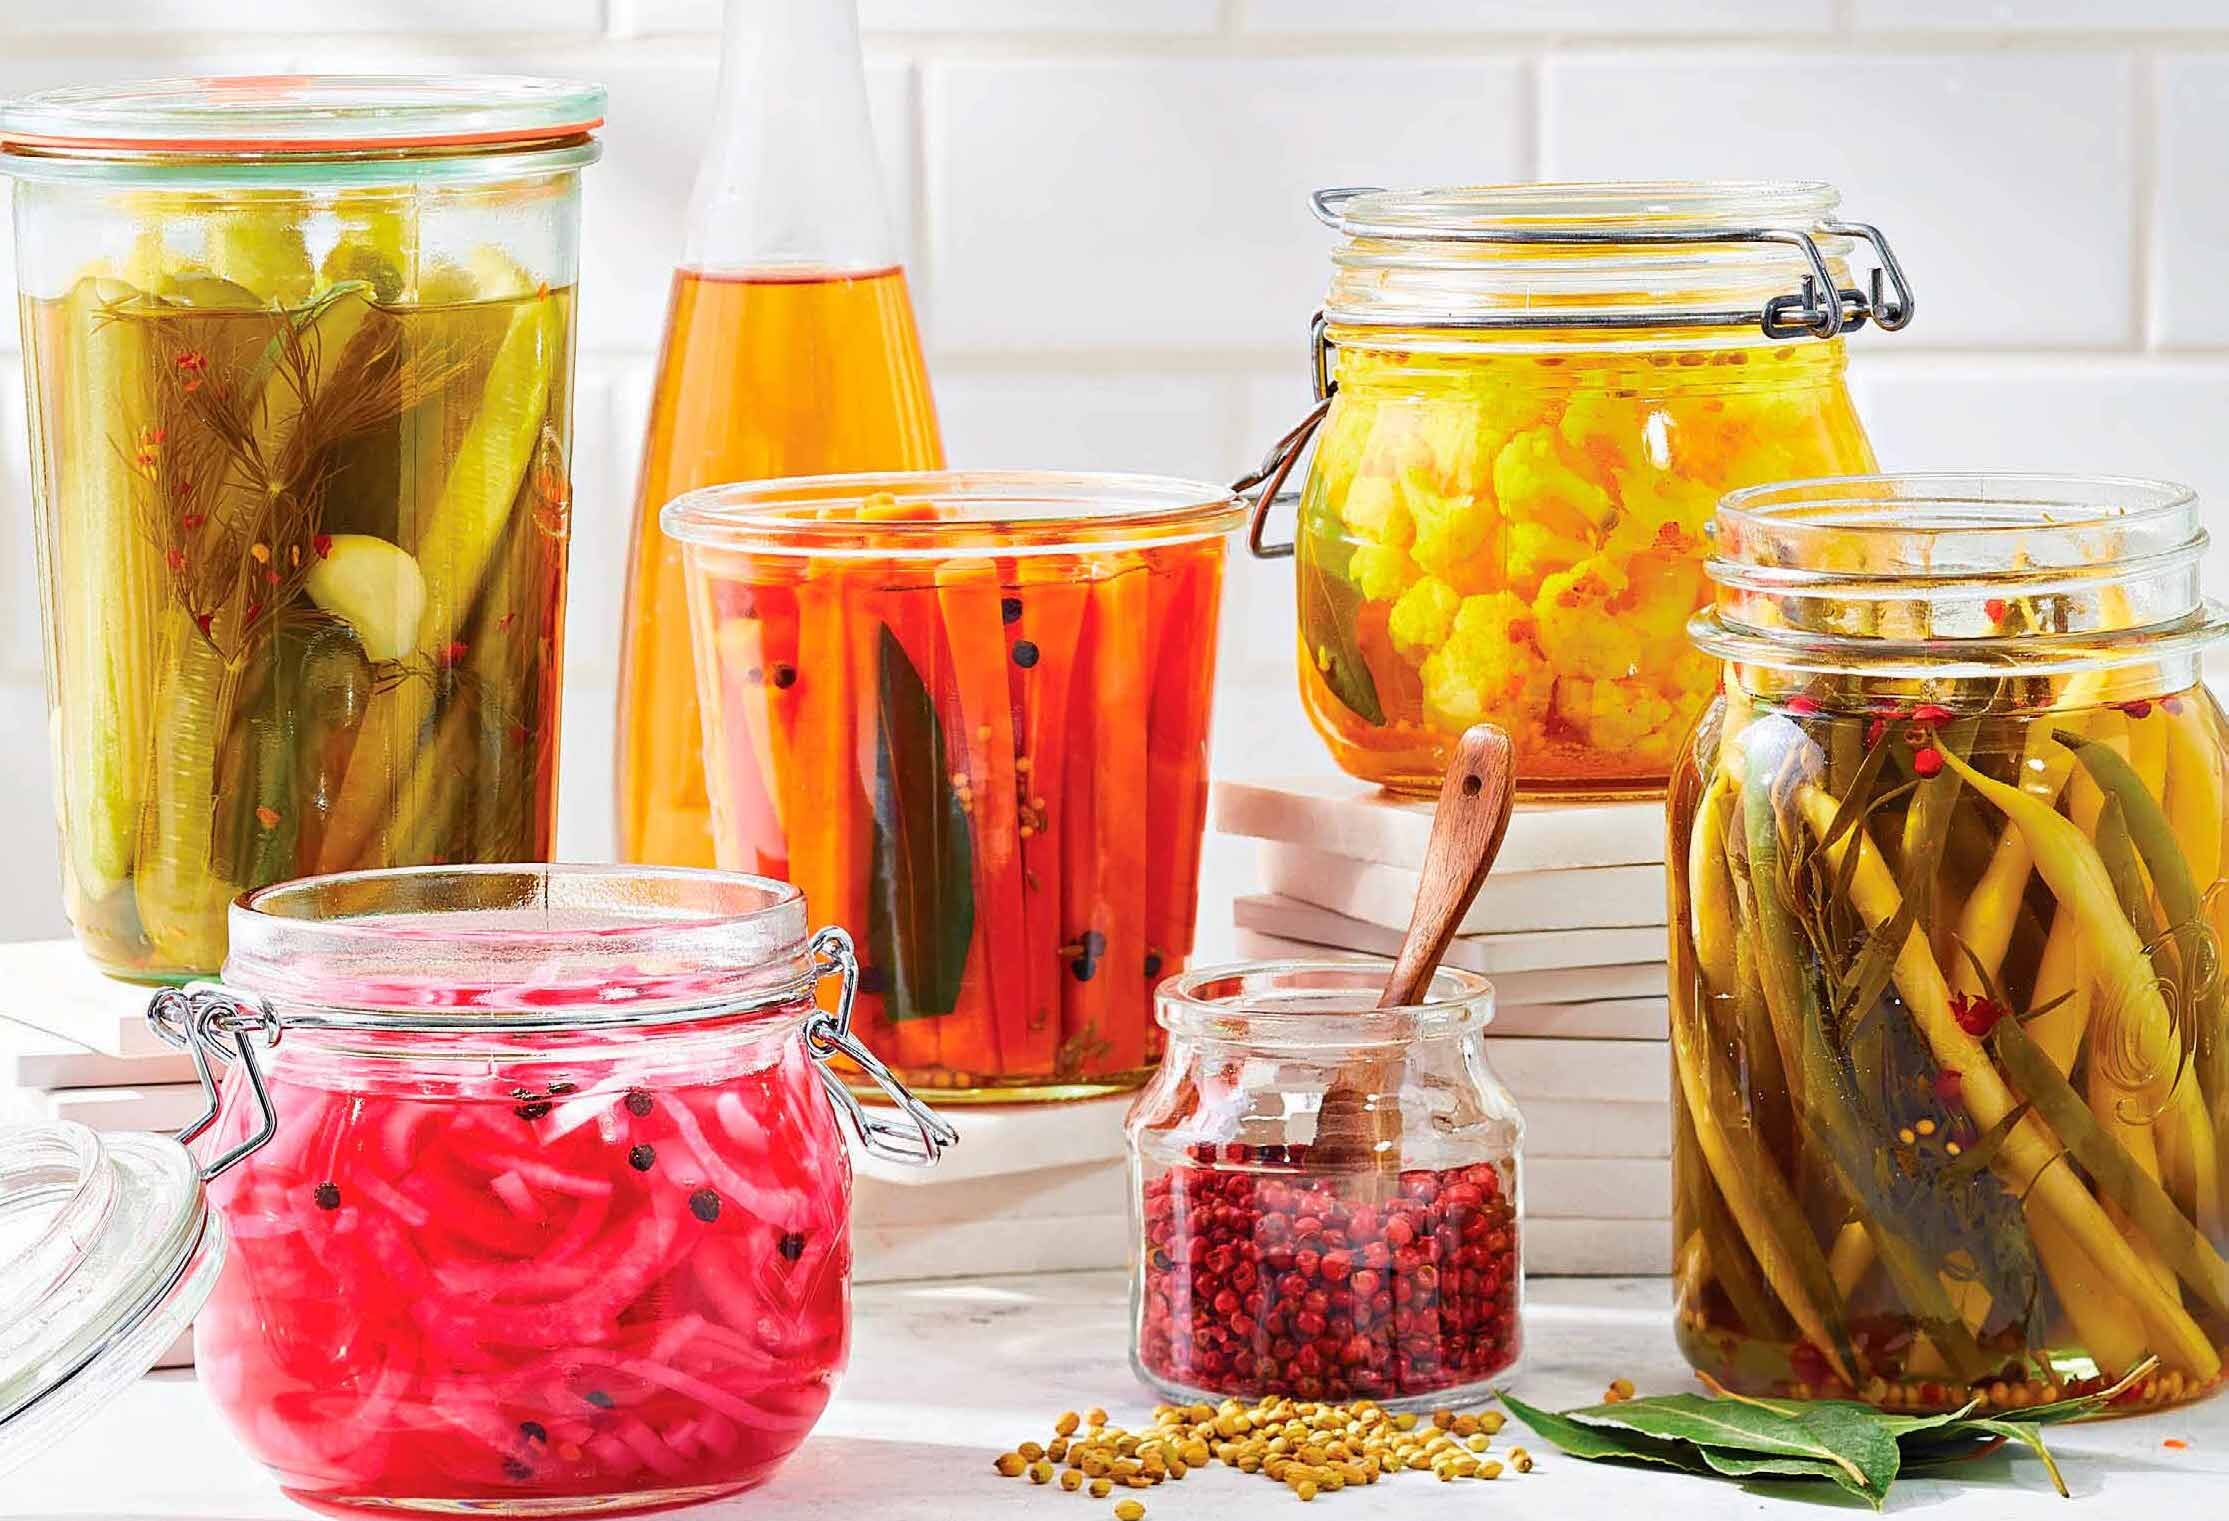 An array of different low-sodium quick-pickled vegetables, including pickles, carrots, quick-pickled red onions, and more, with a cruet full of vinegar in the background